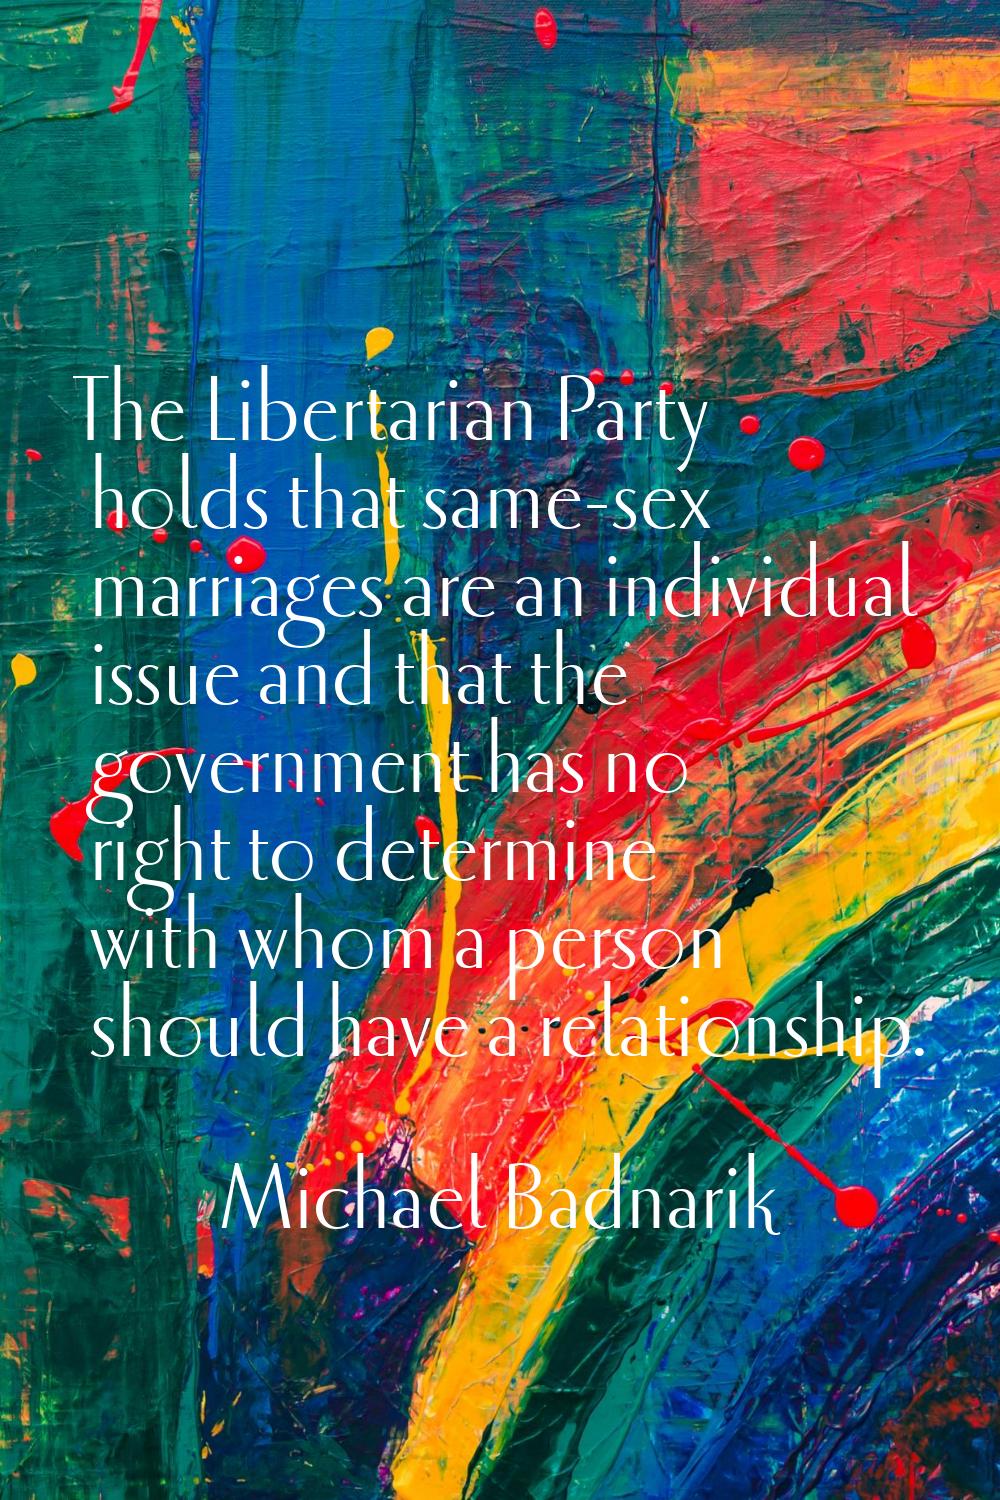 The Libertarian Party holds that same-sex marriages are an individual issue and that the government